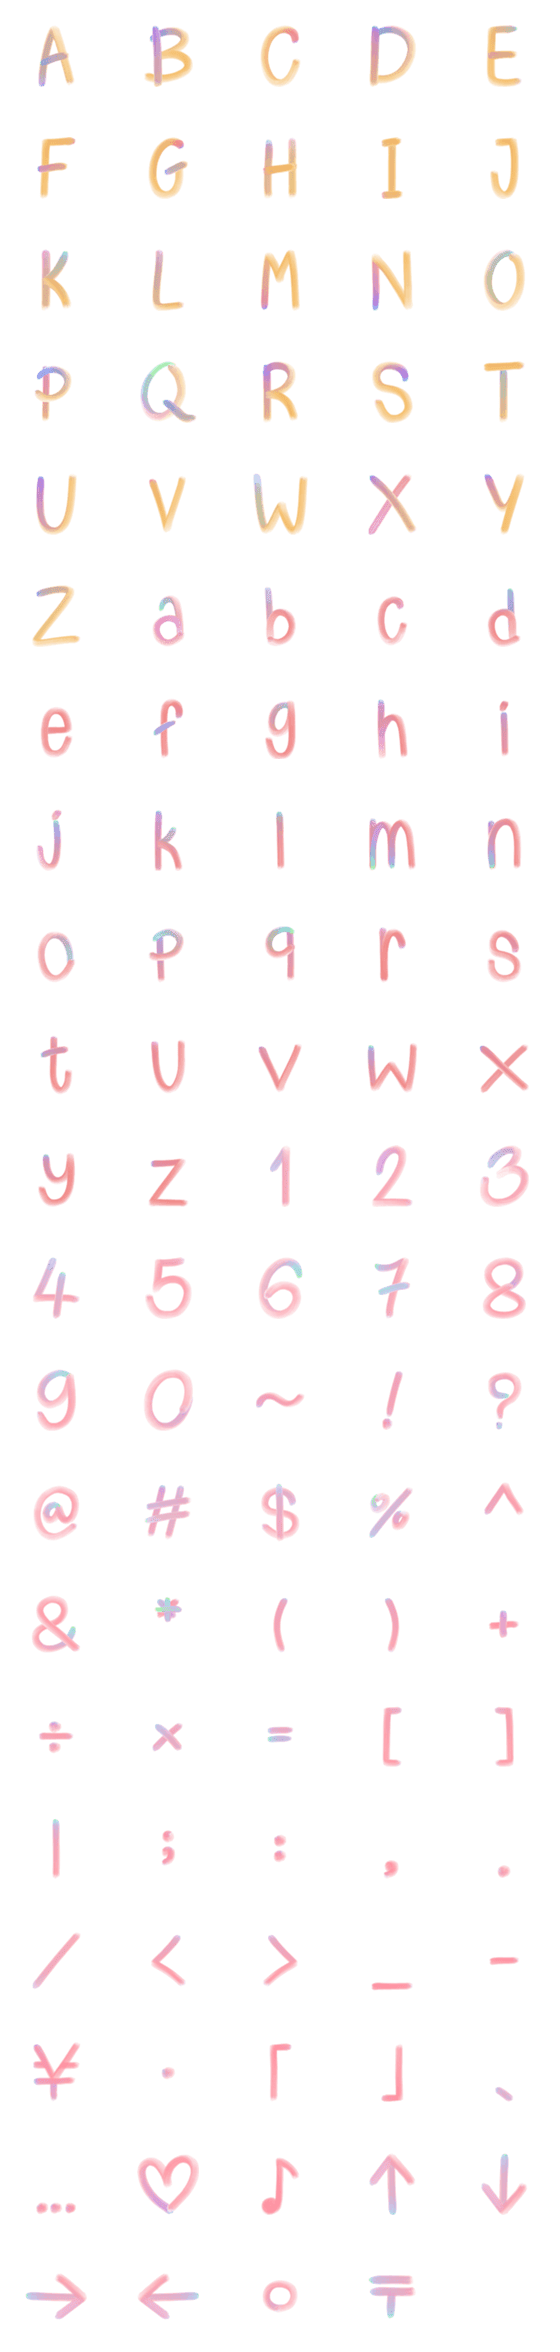 [LINE絵文字]Rainbow font A-Zの画像一覧